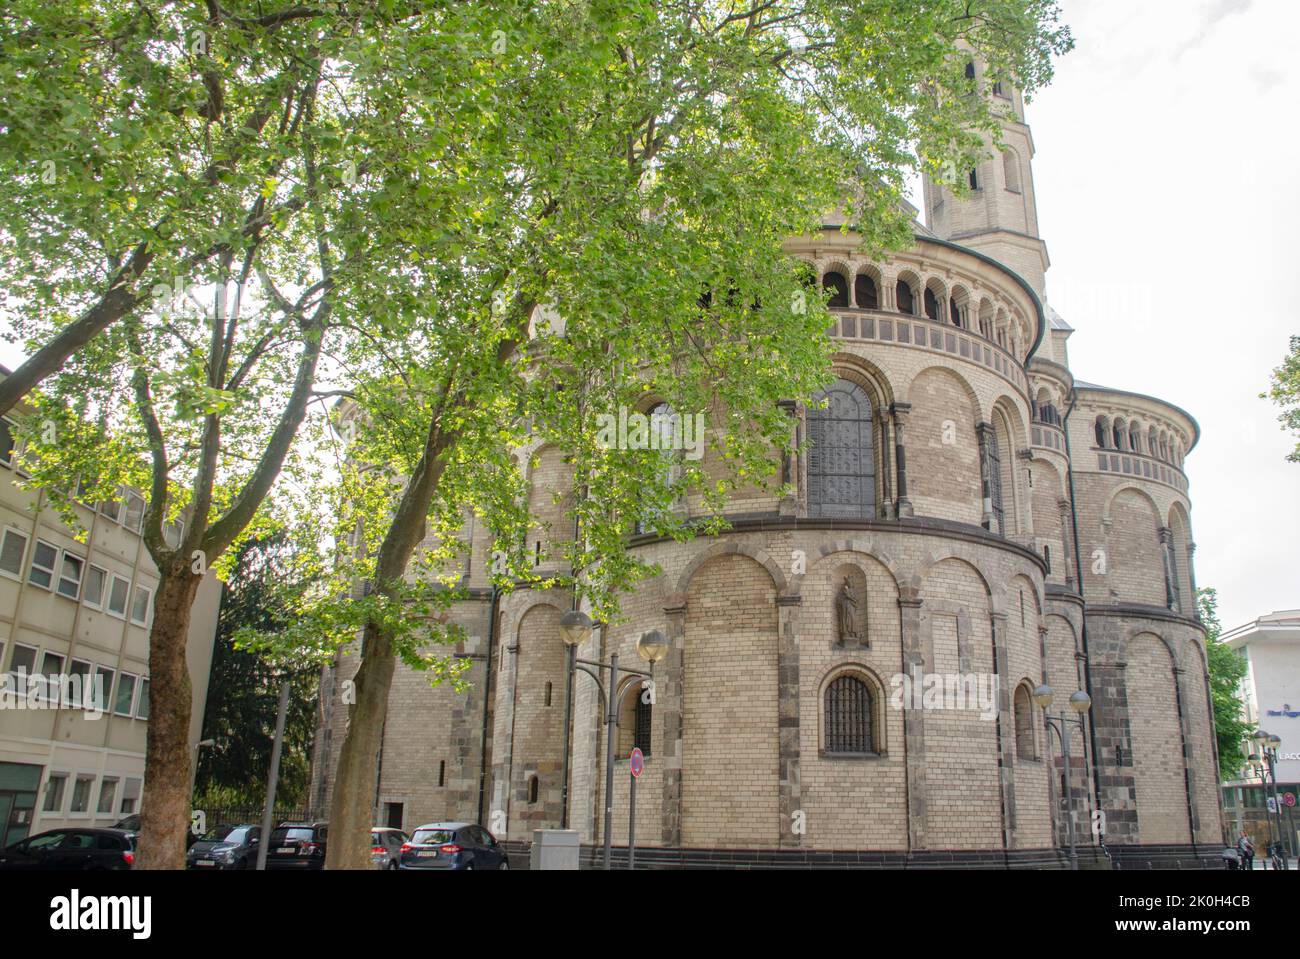 Cologne August 2022: St. Aposteln is a Roman Catholic church and one of the twelve major Romanesque churches in the city of Cologne. Stock Photo